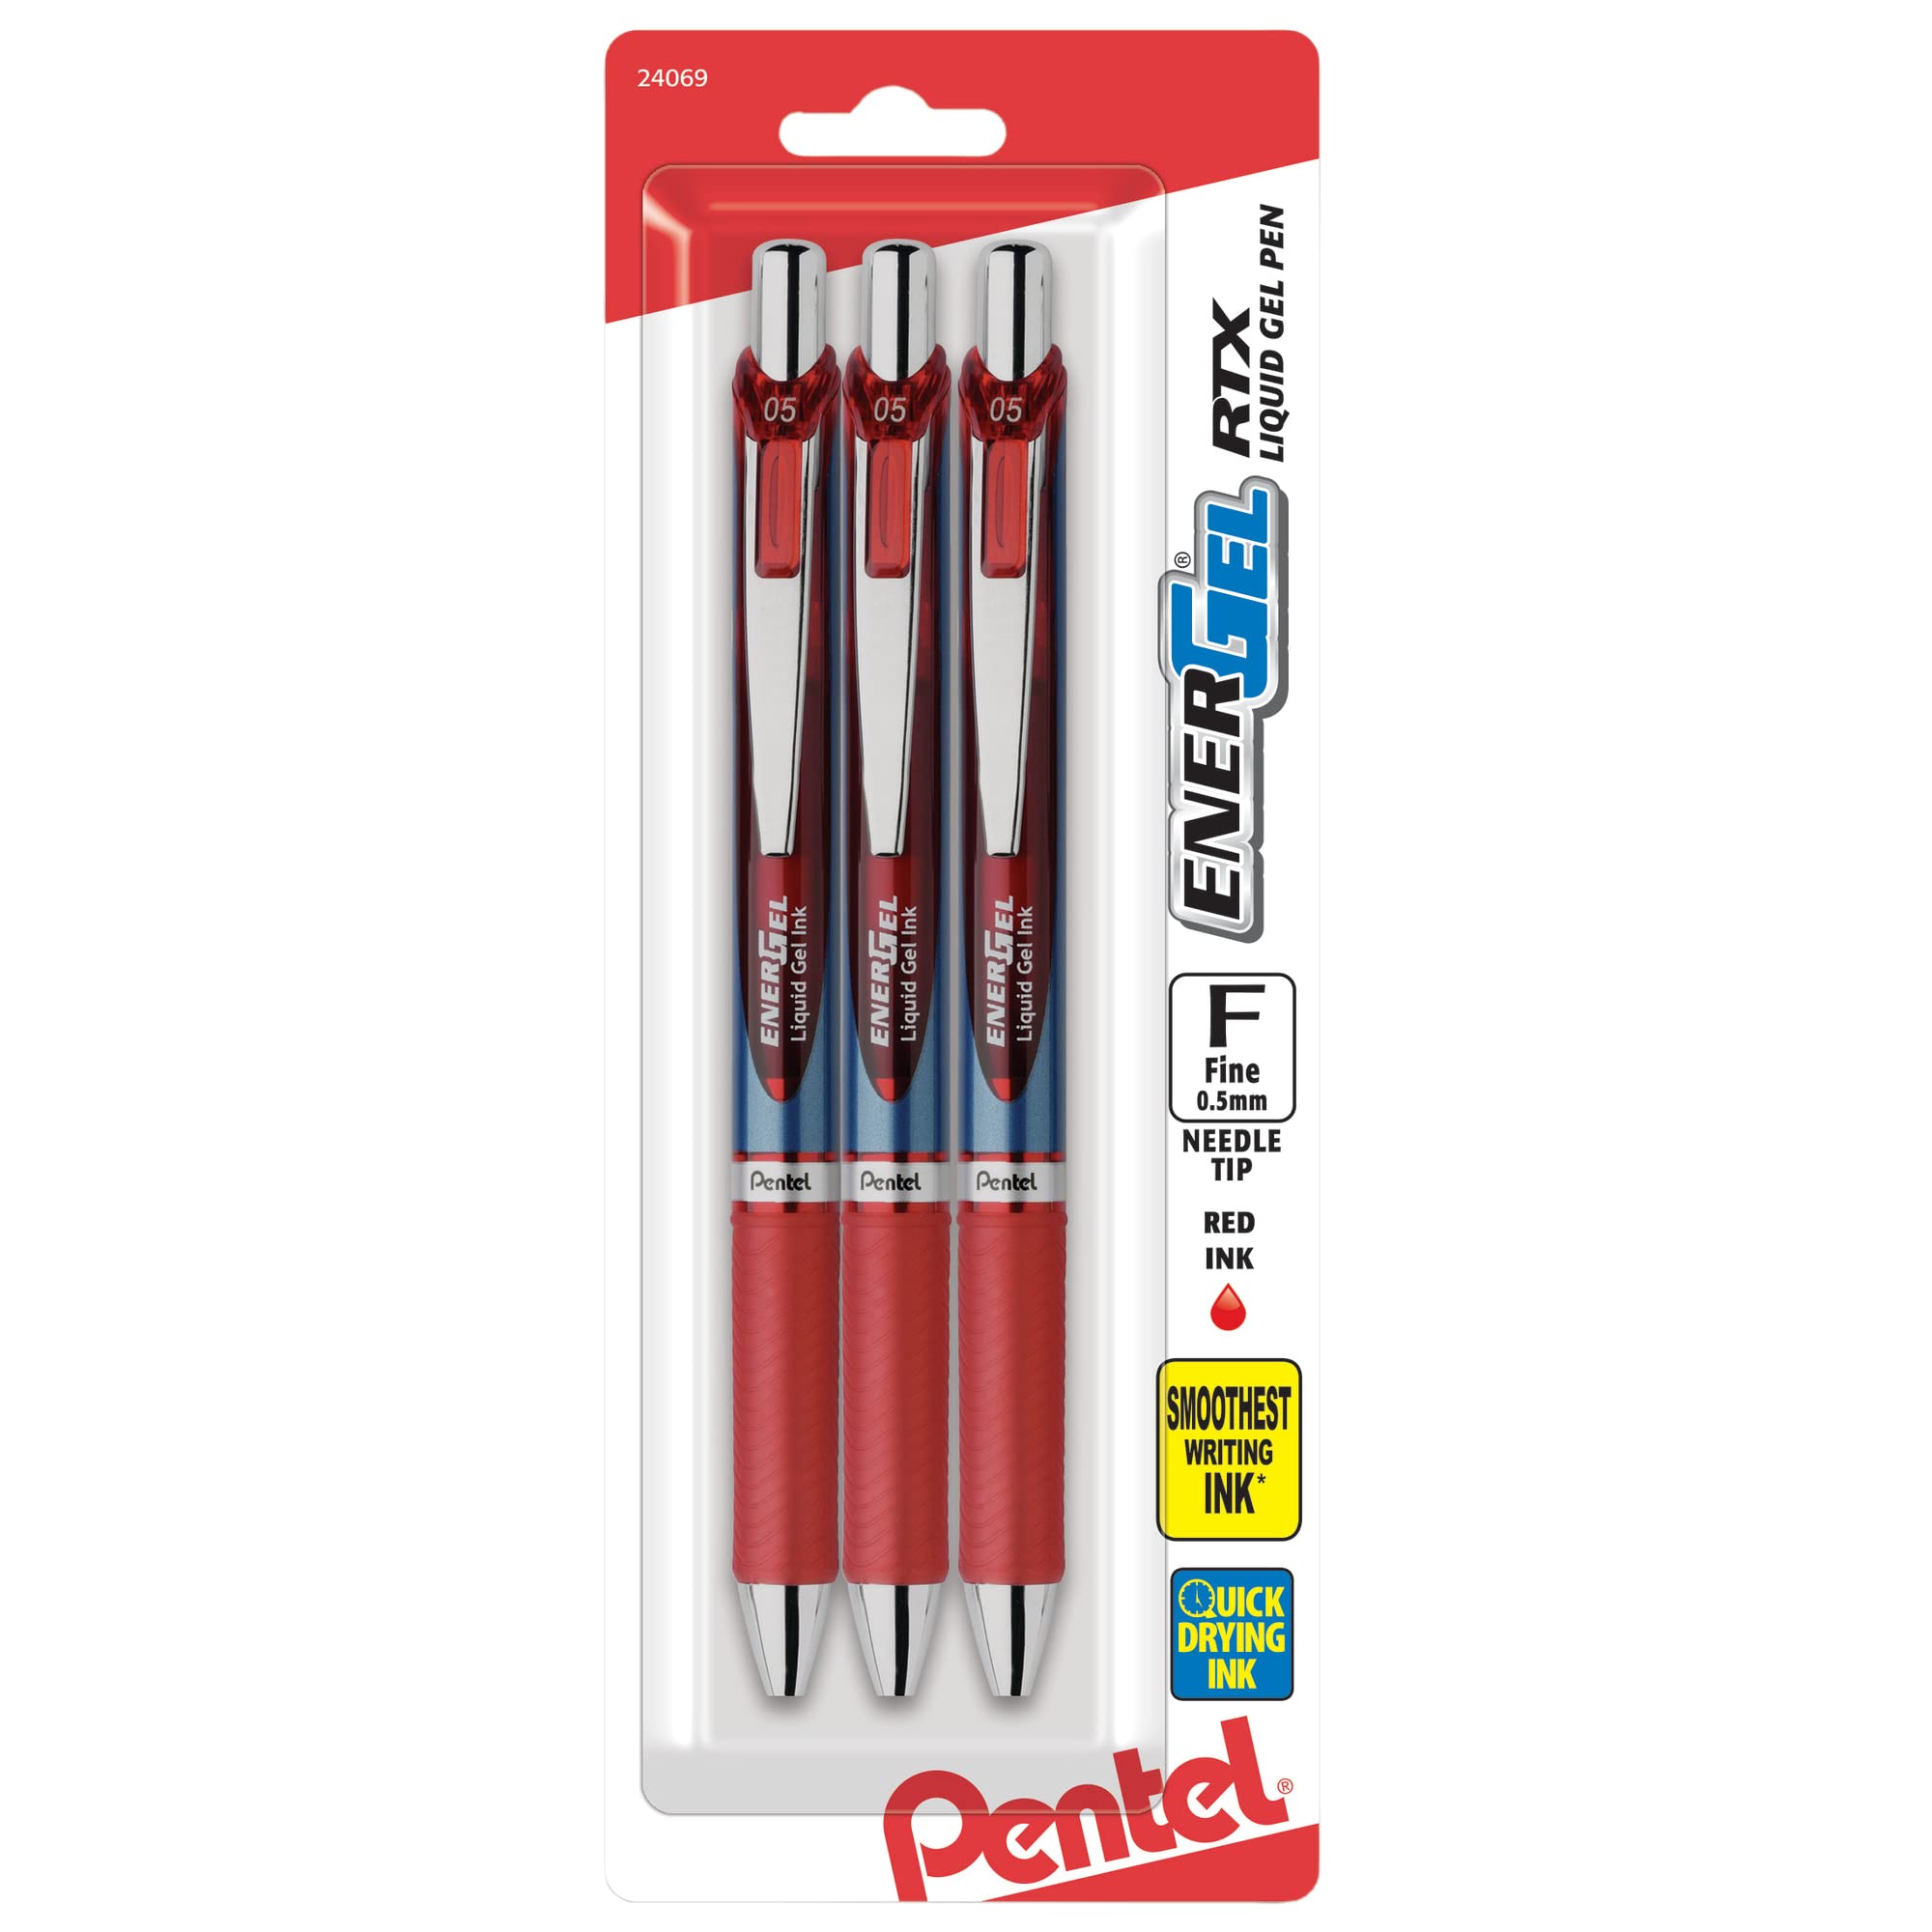 Pentel® EnerGel® RTX Retractable Liquid Gel Pens, Fine Point, 0.5mm, 54% Recycled, Assorted Barrel Colors, Red Ink, Pack Of 3 Pans